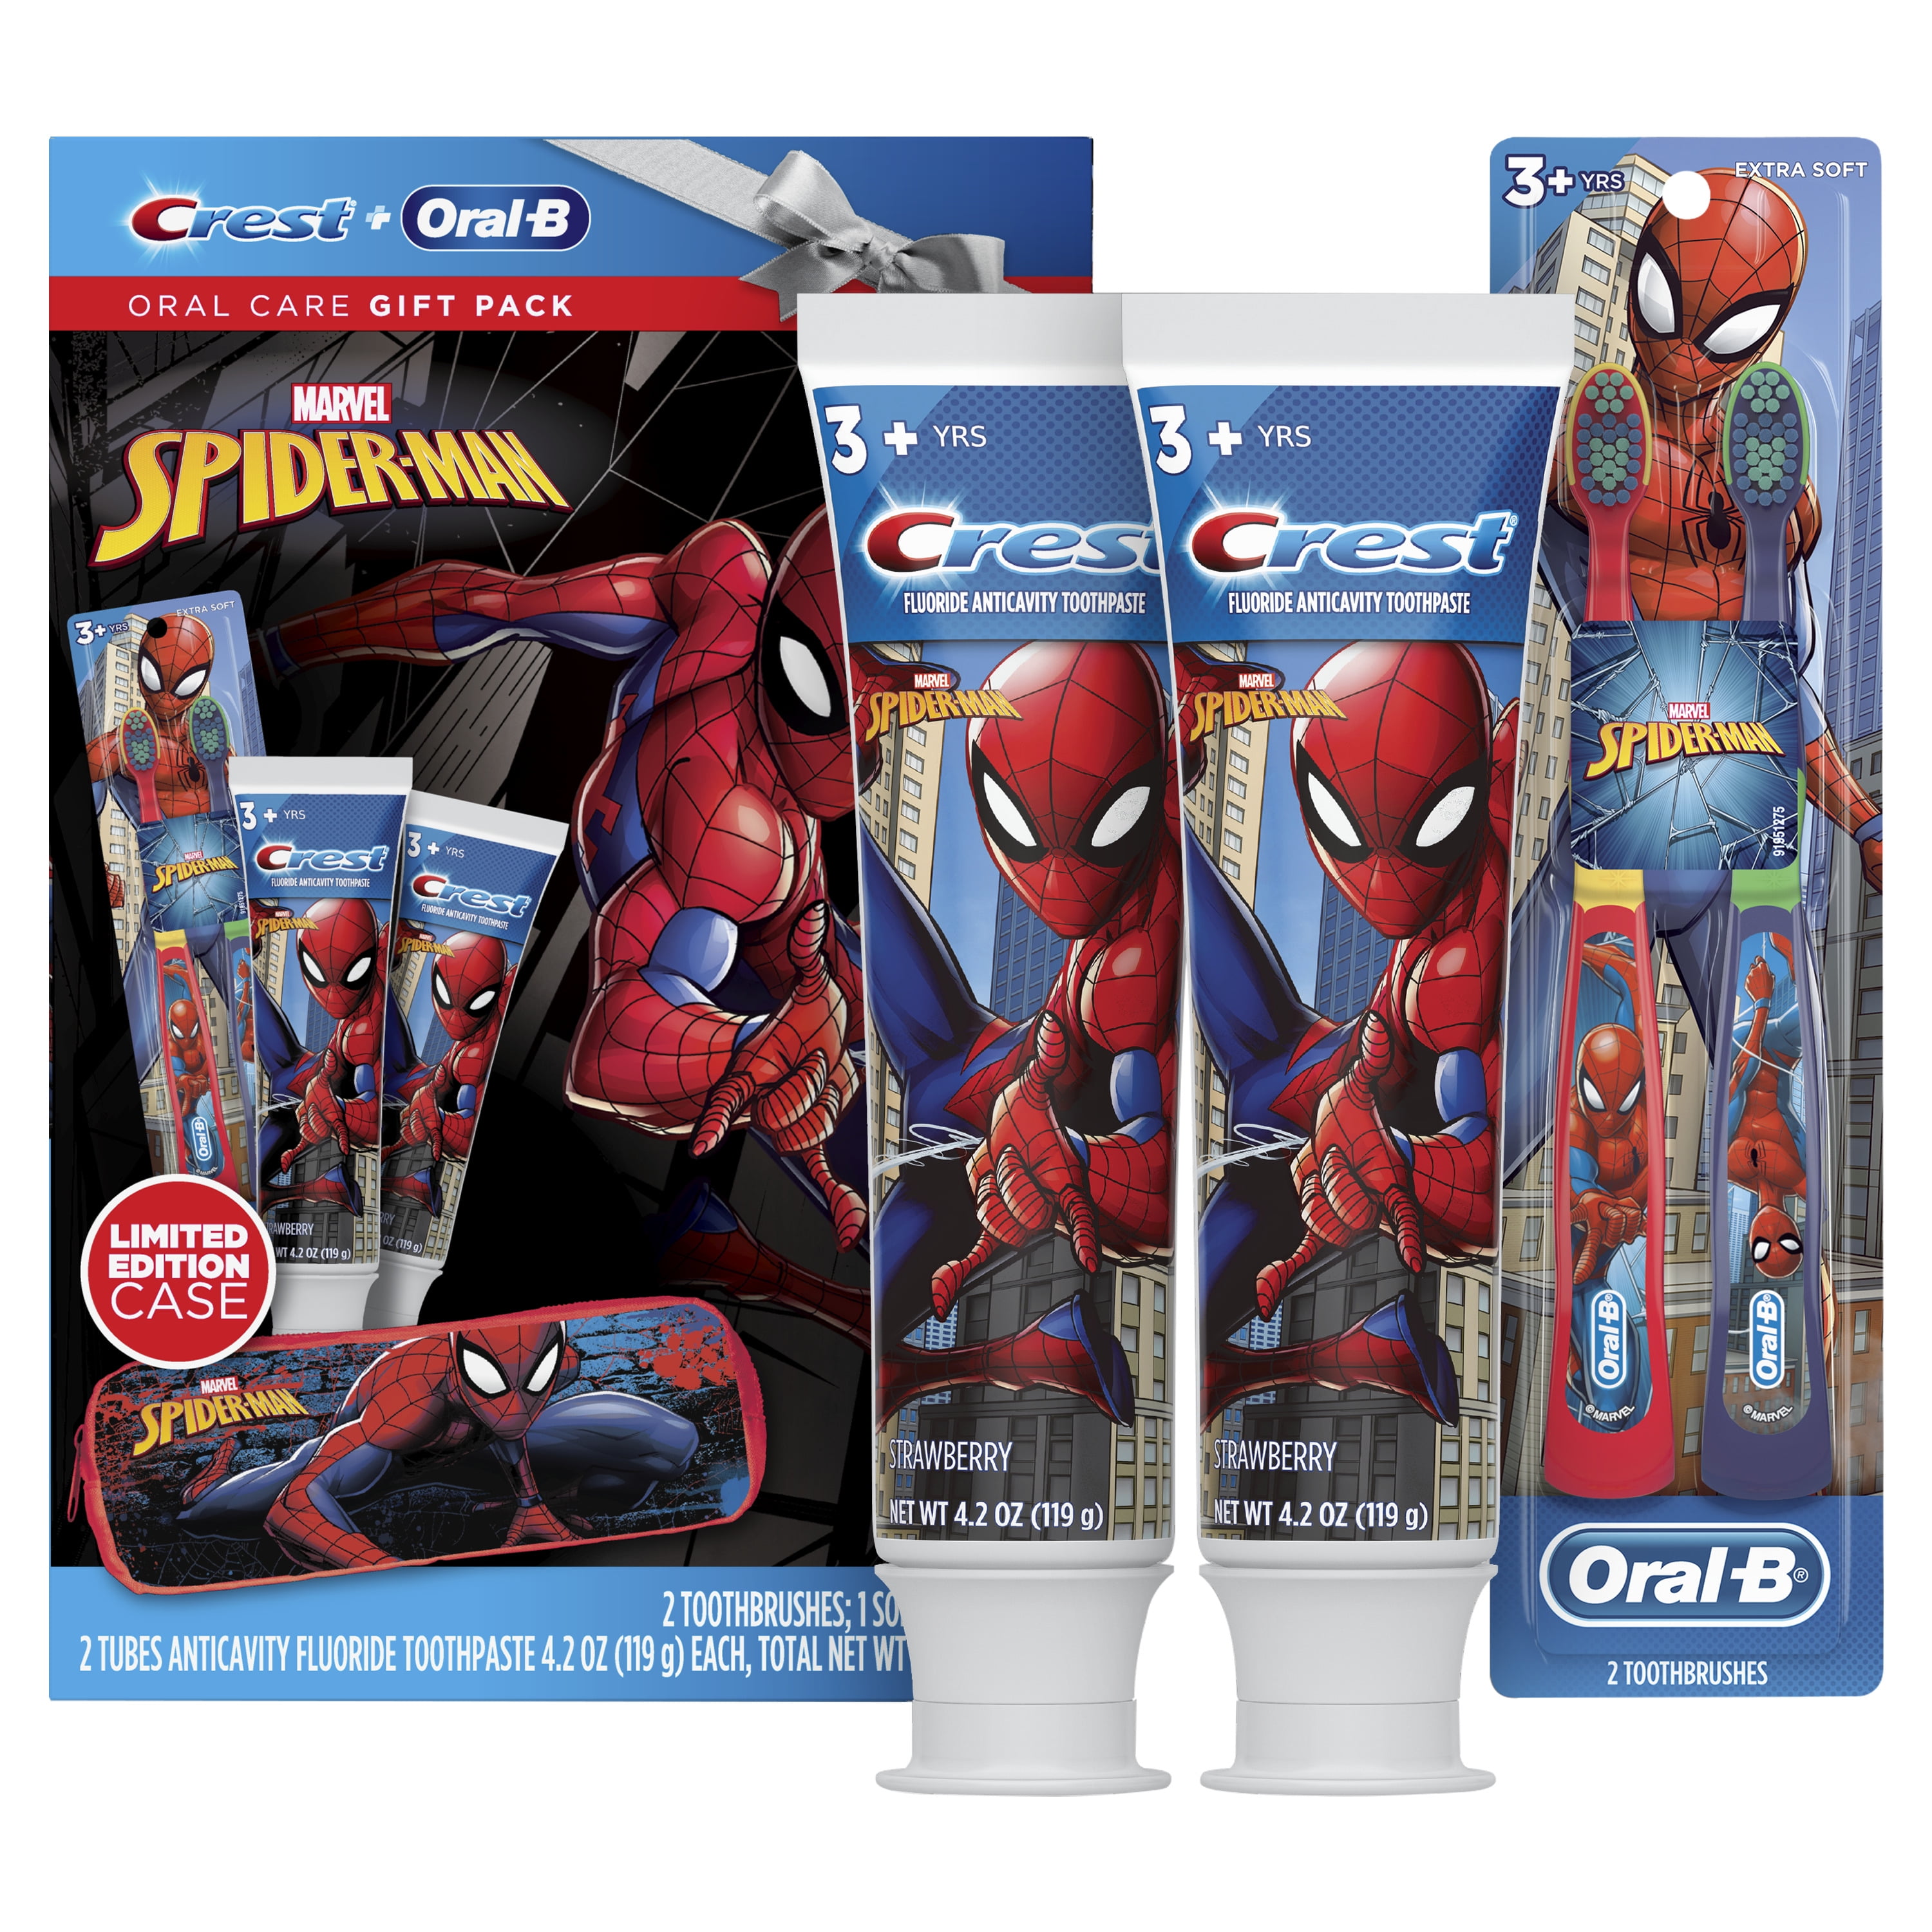 25-value-crest-oral-b-kids-spiderman-holiday-pack-gift-set-with-2